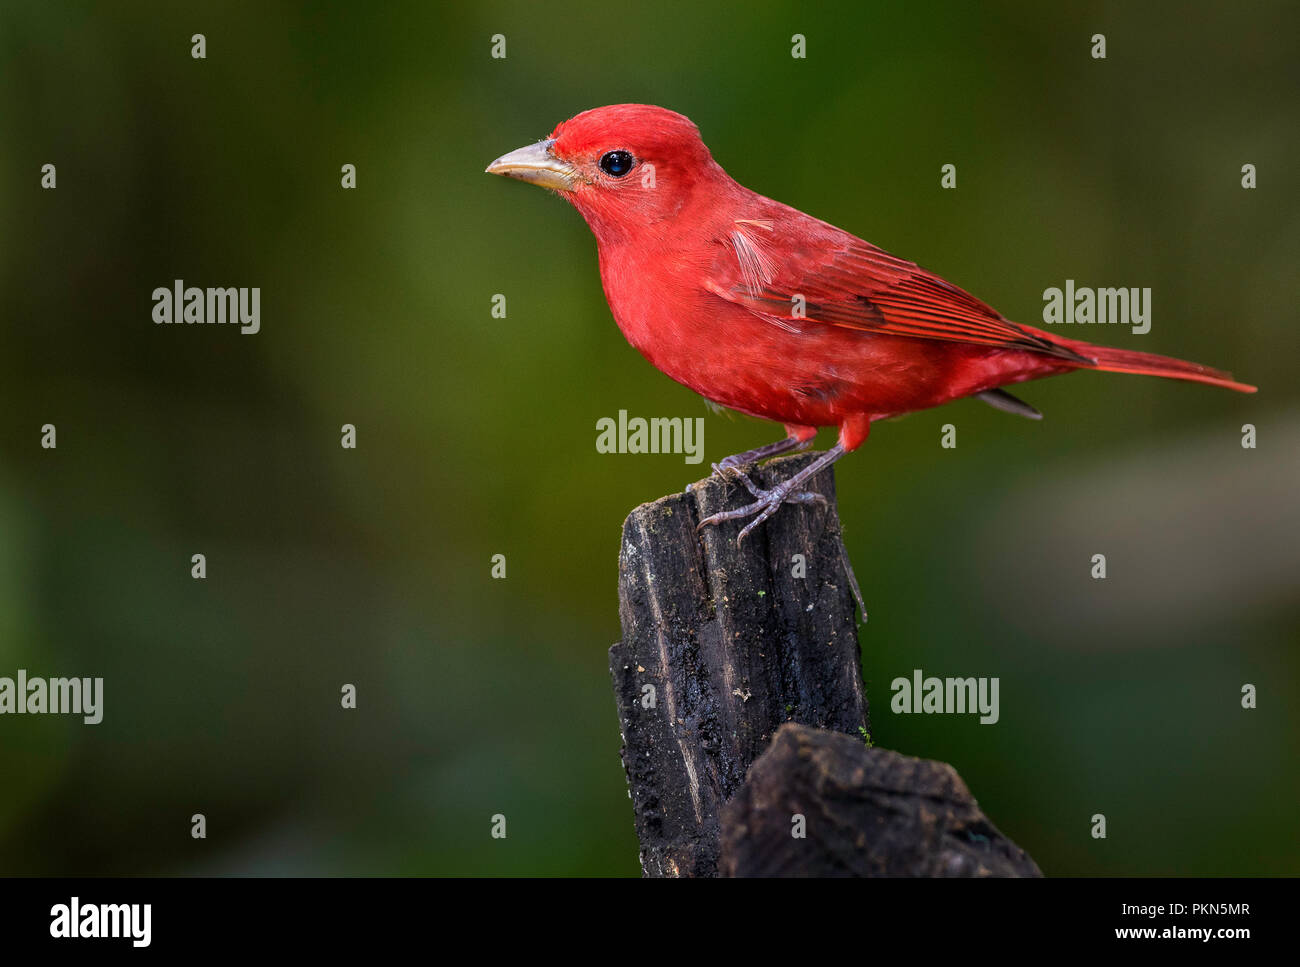 A perched summer tanager photographed in Boca Tapada, Costa Rica Stock Photo